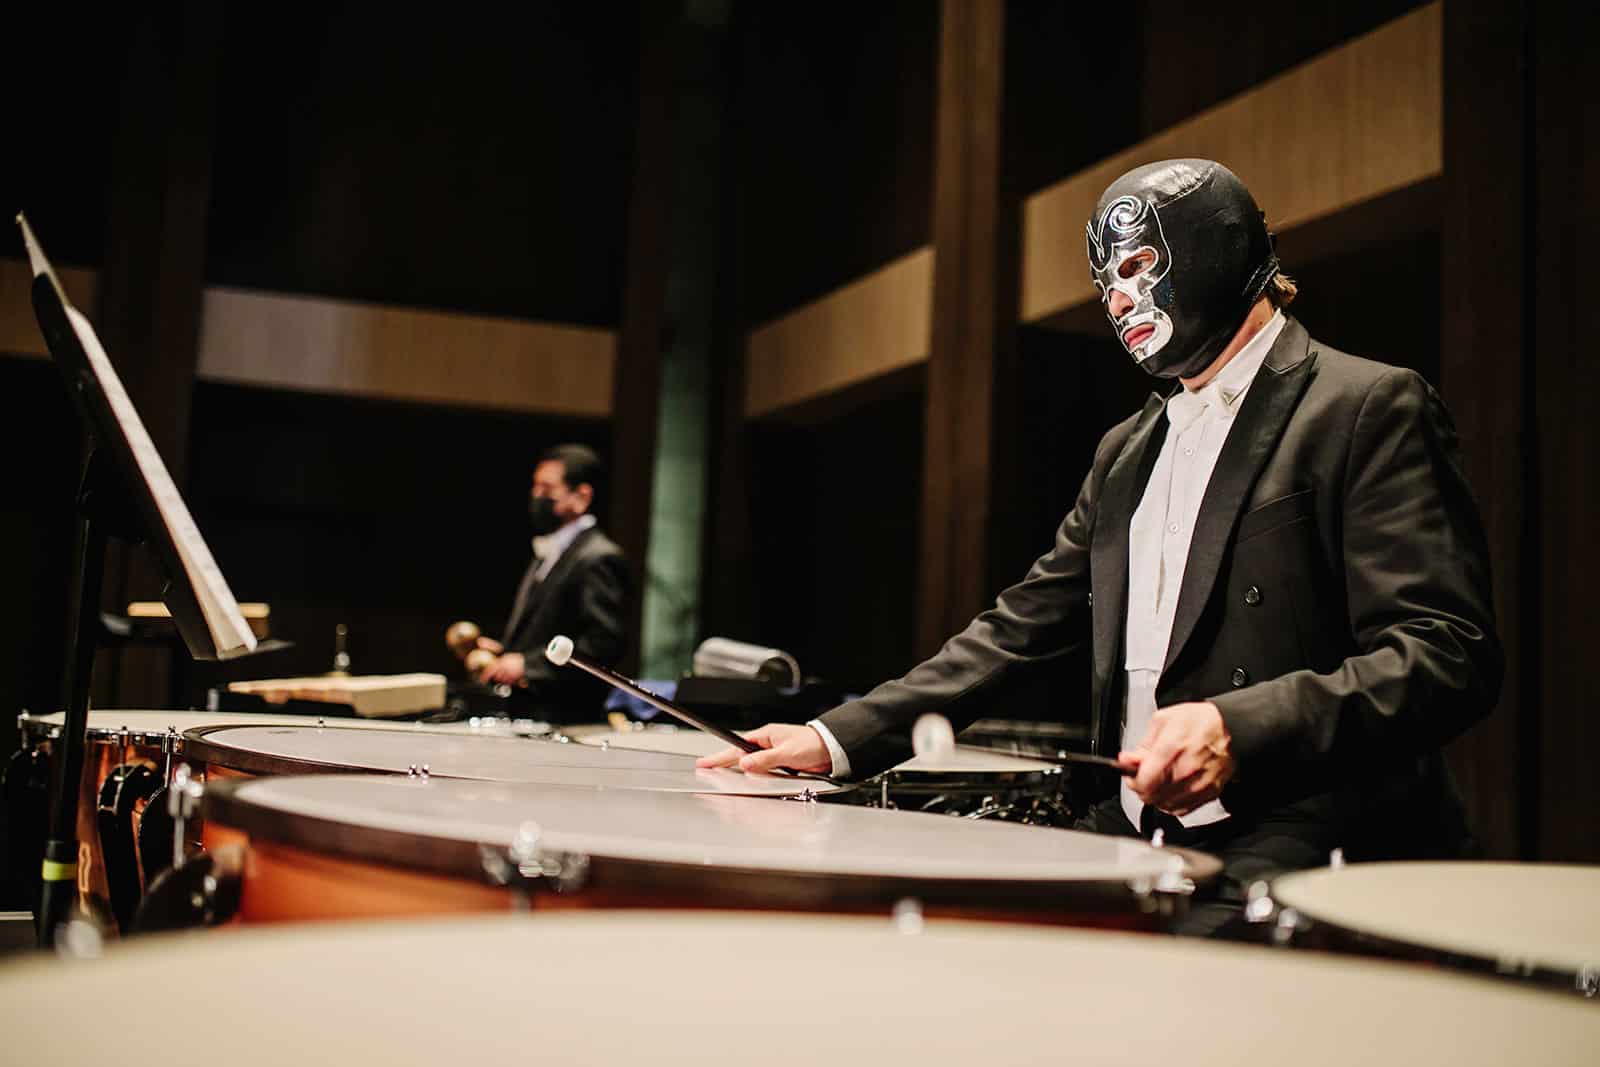 Person in black and silver luchador mask playing timpani drums